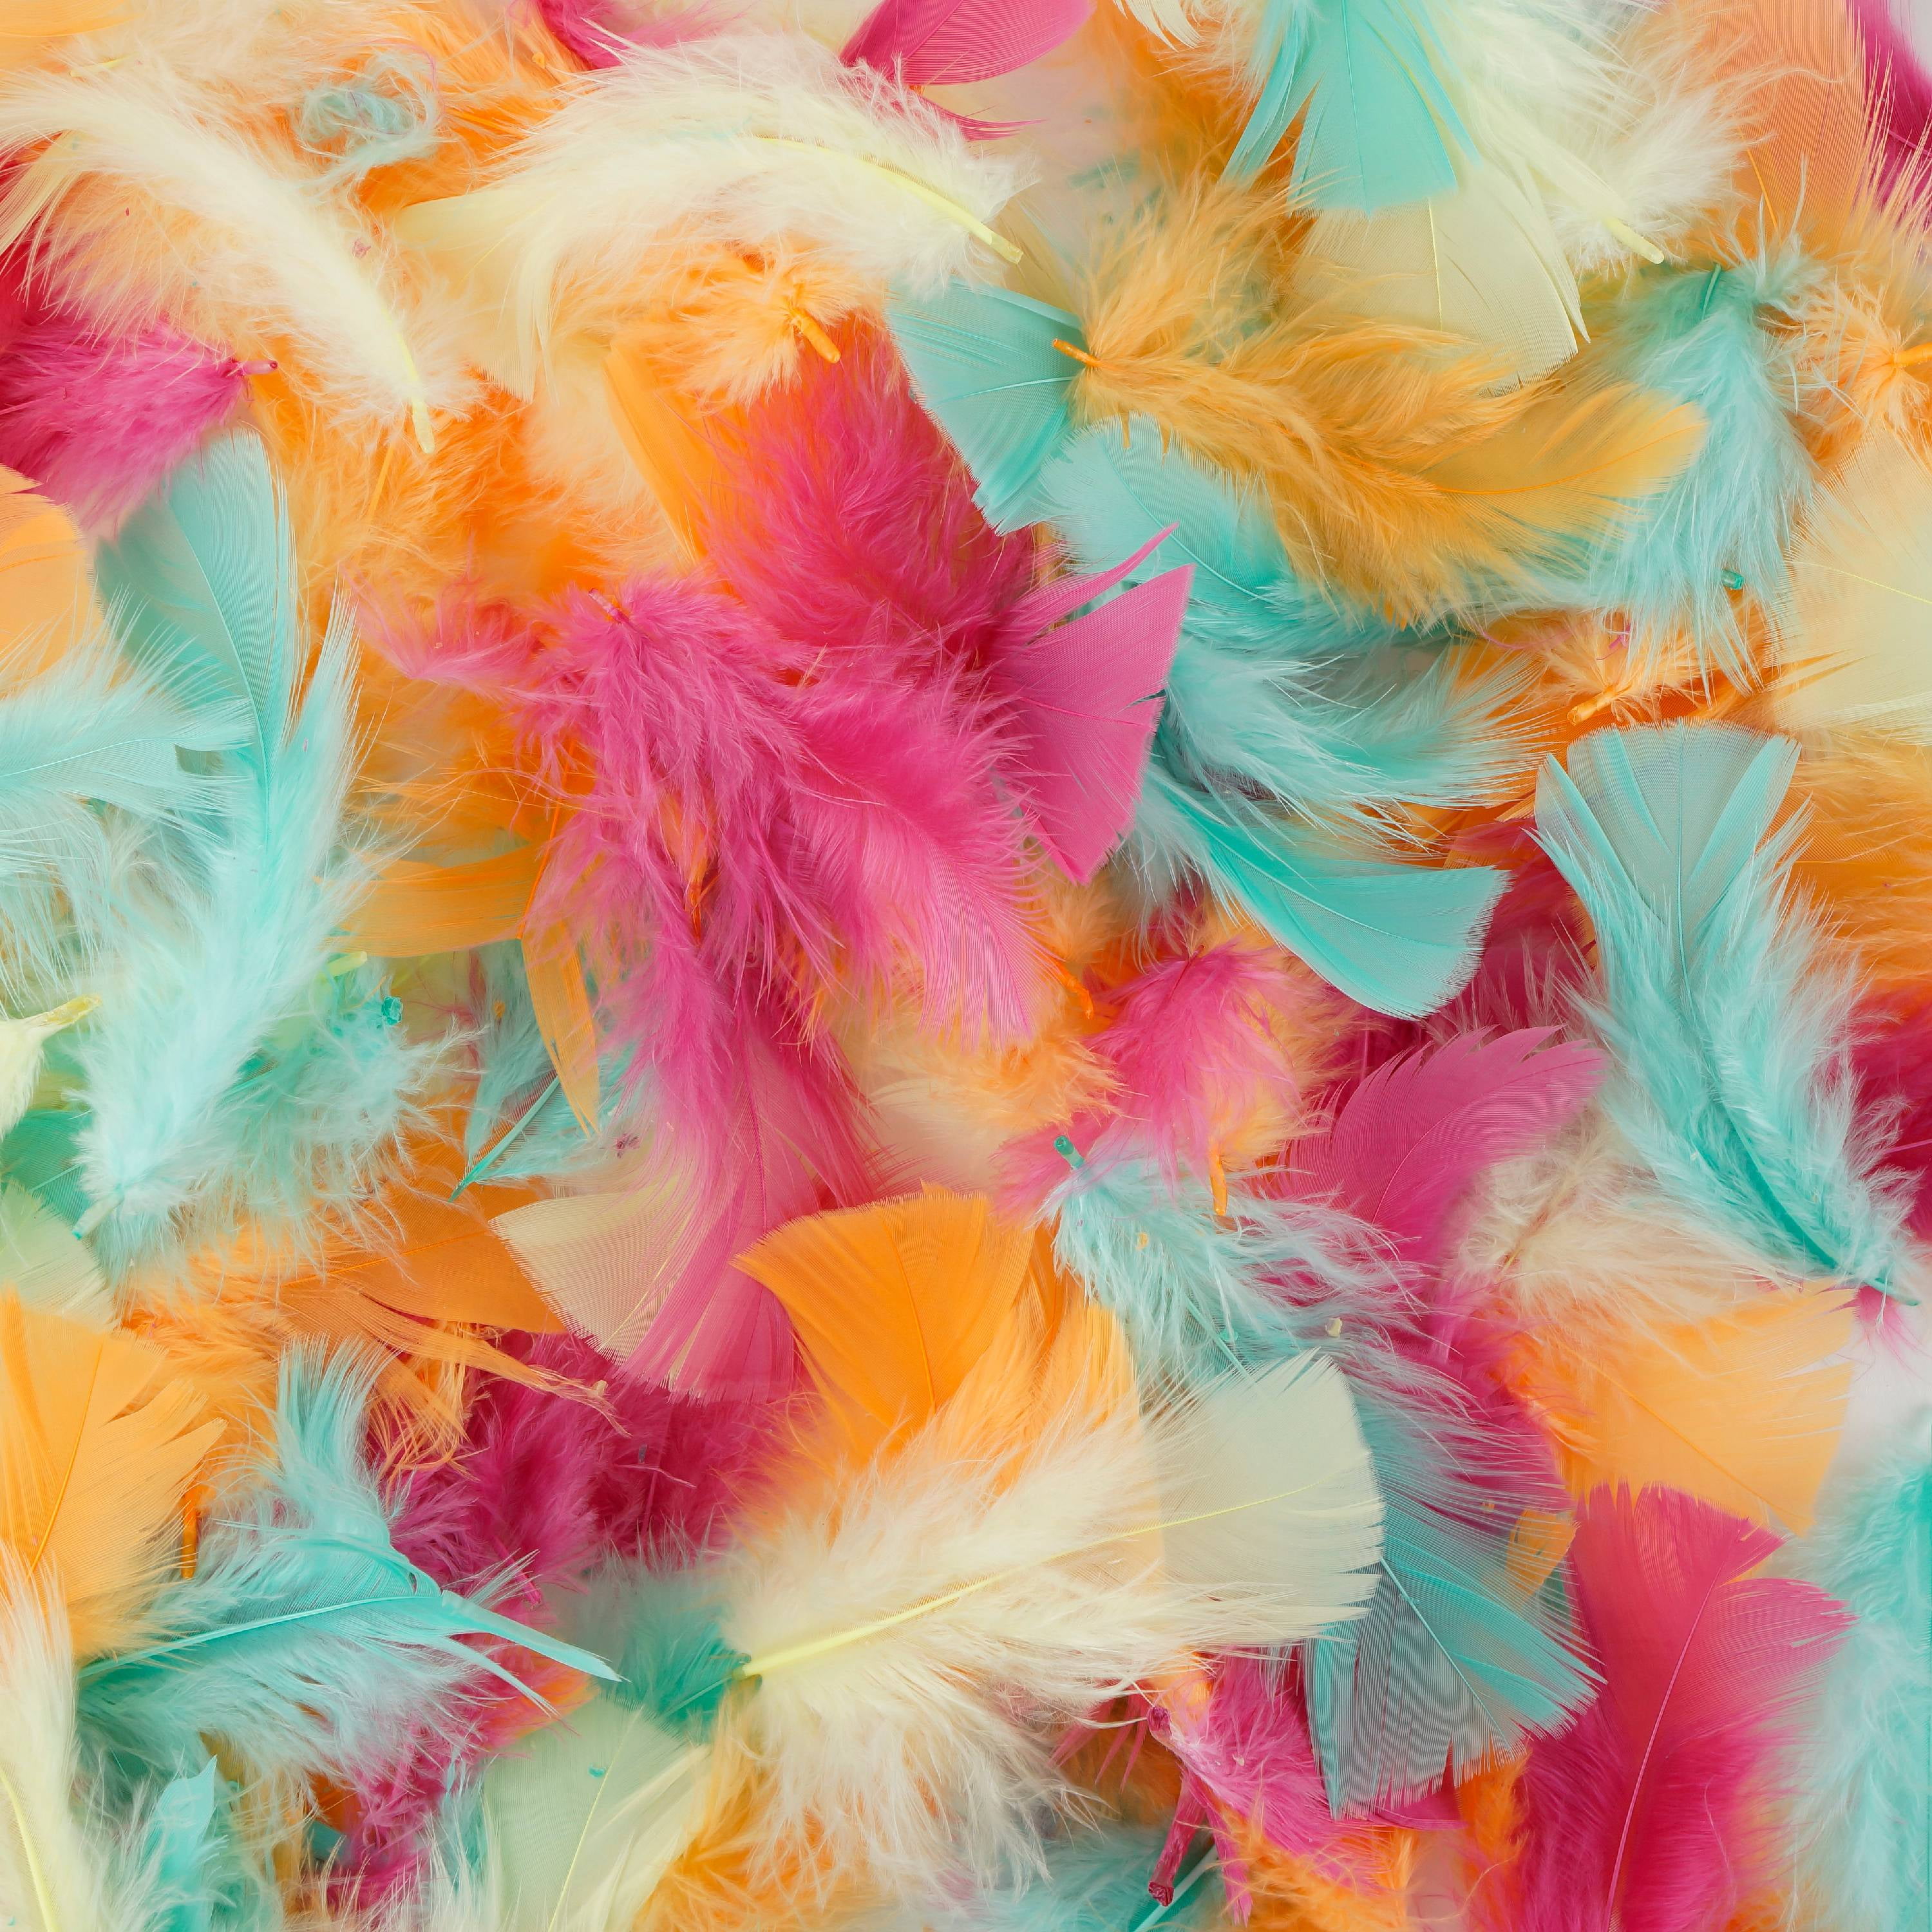 50pcs Feathers,turkey Feathers,sapphire Blue Feathers,fluffy